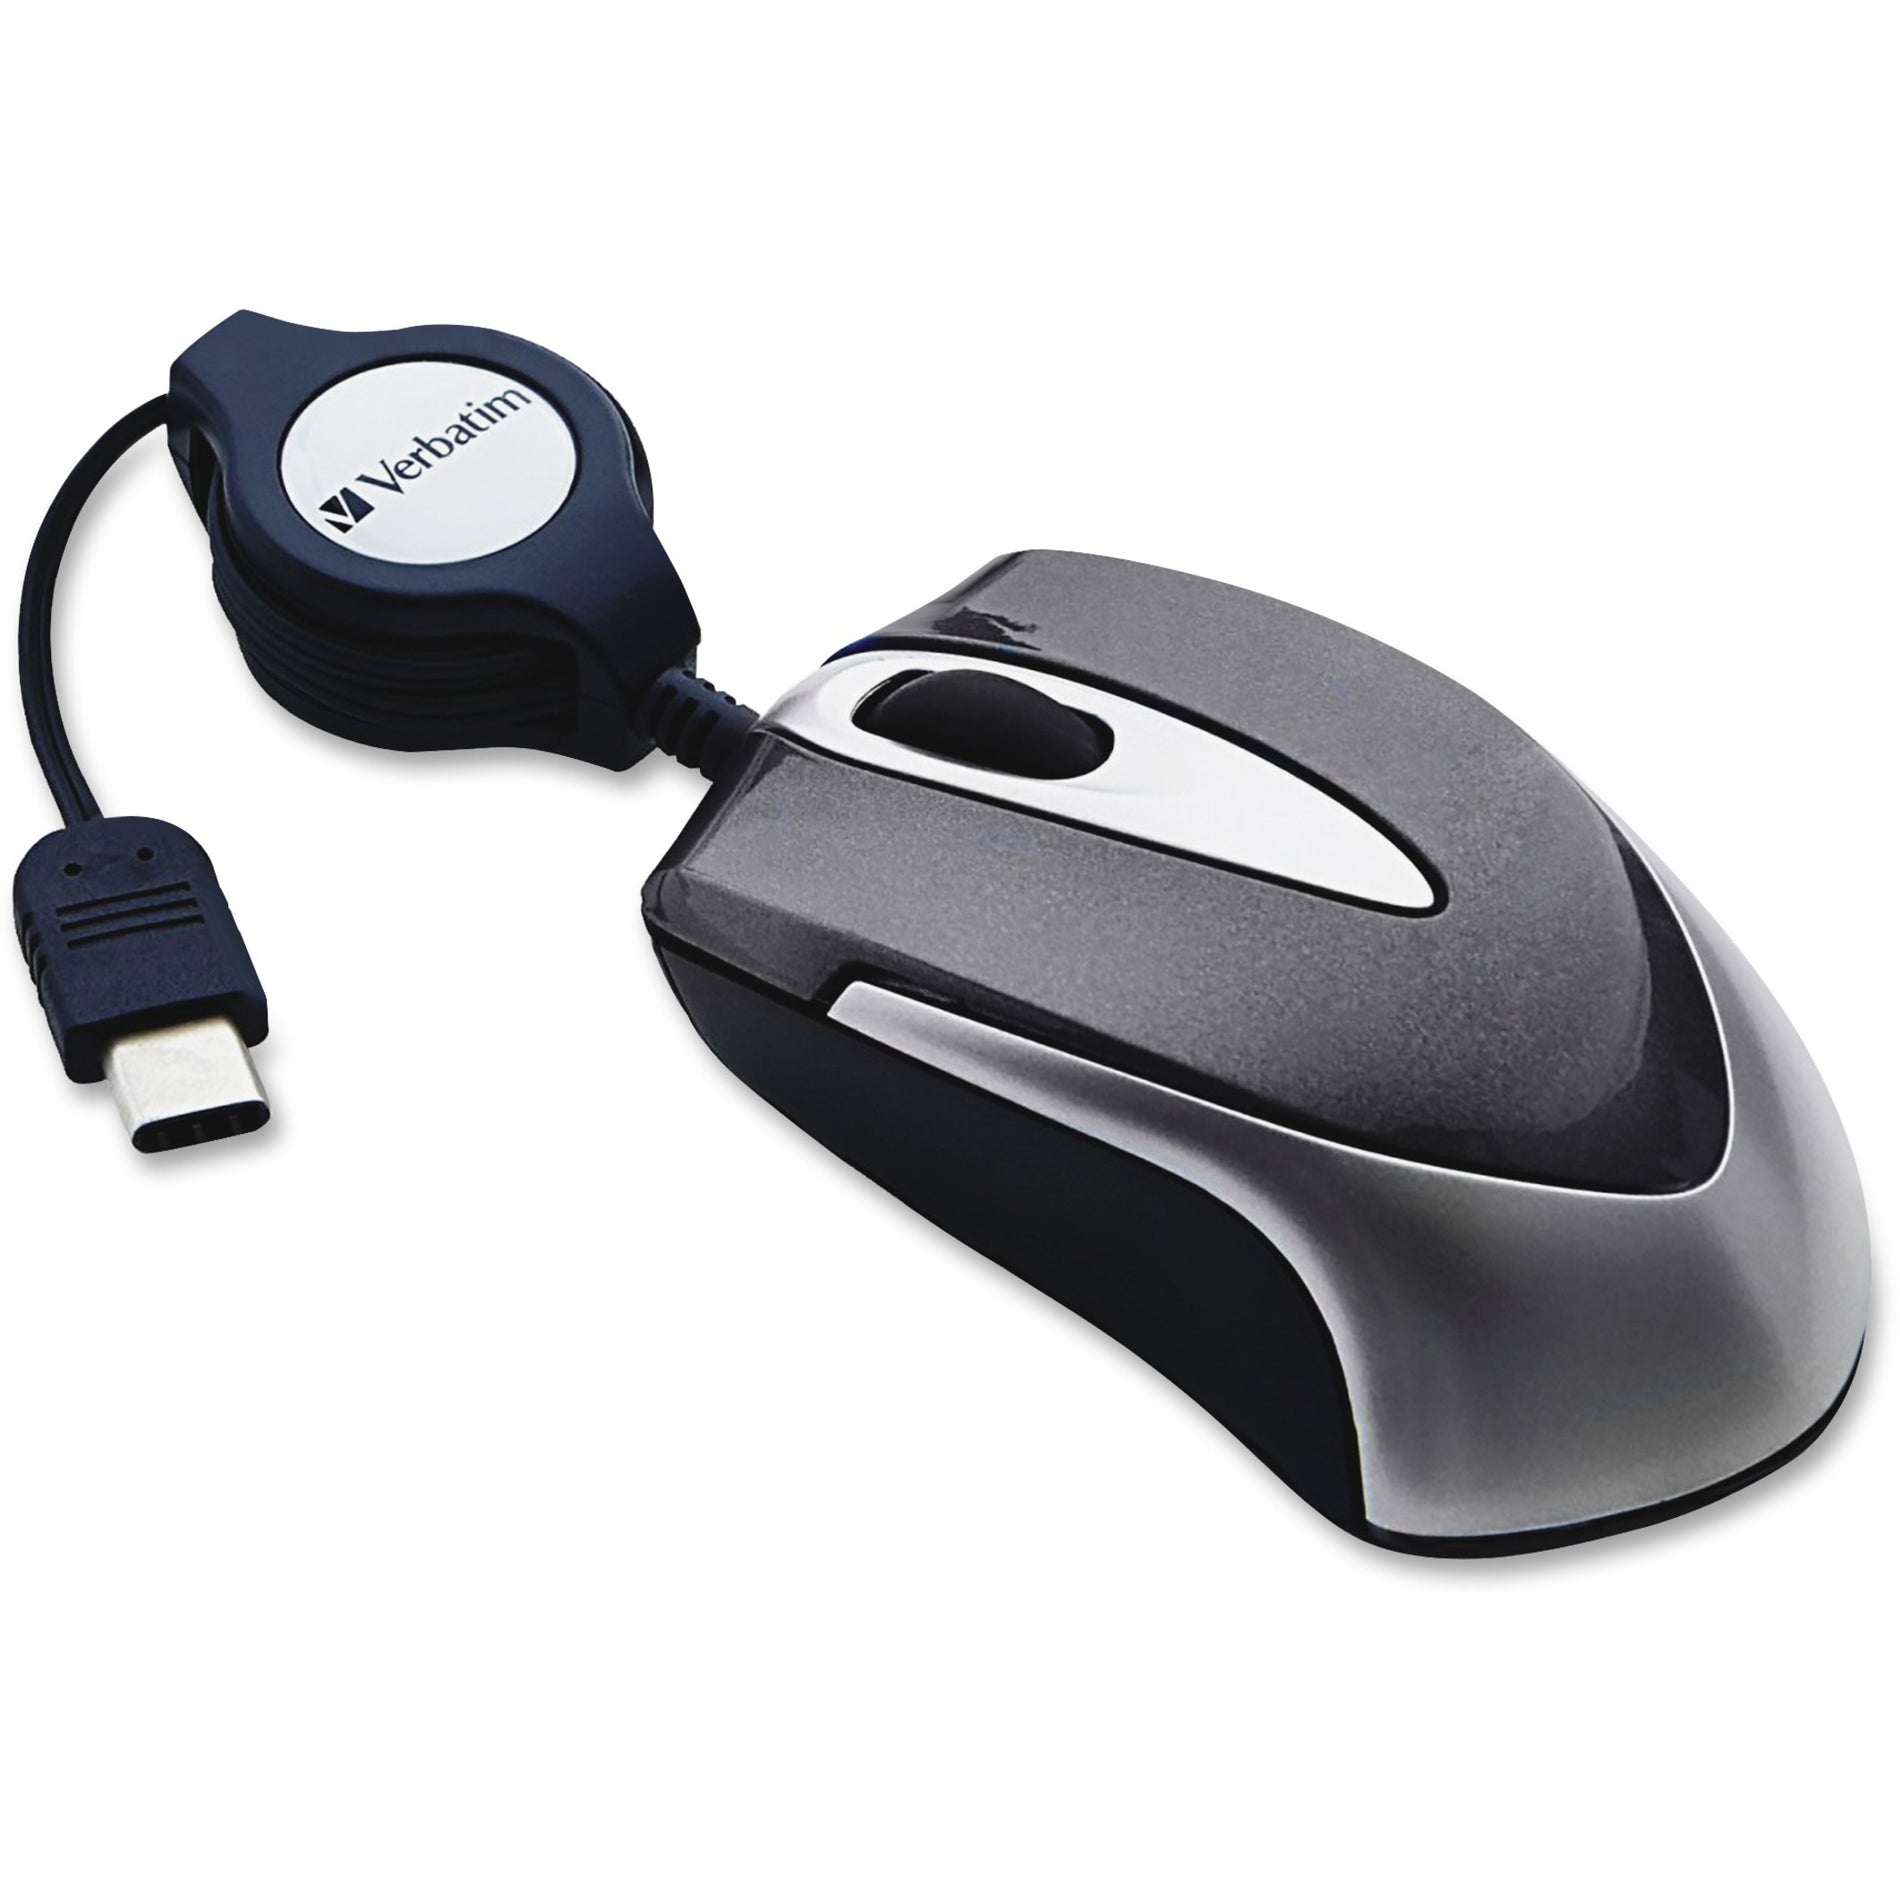 Verbatim 99235 USB-C Mini Optical Travel Mouse, Black - Compact and Portable Mouse for Notebooks